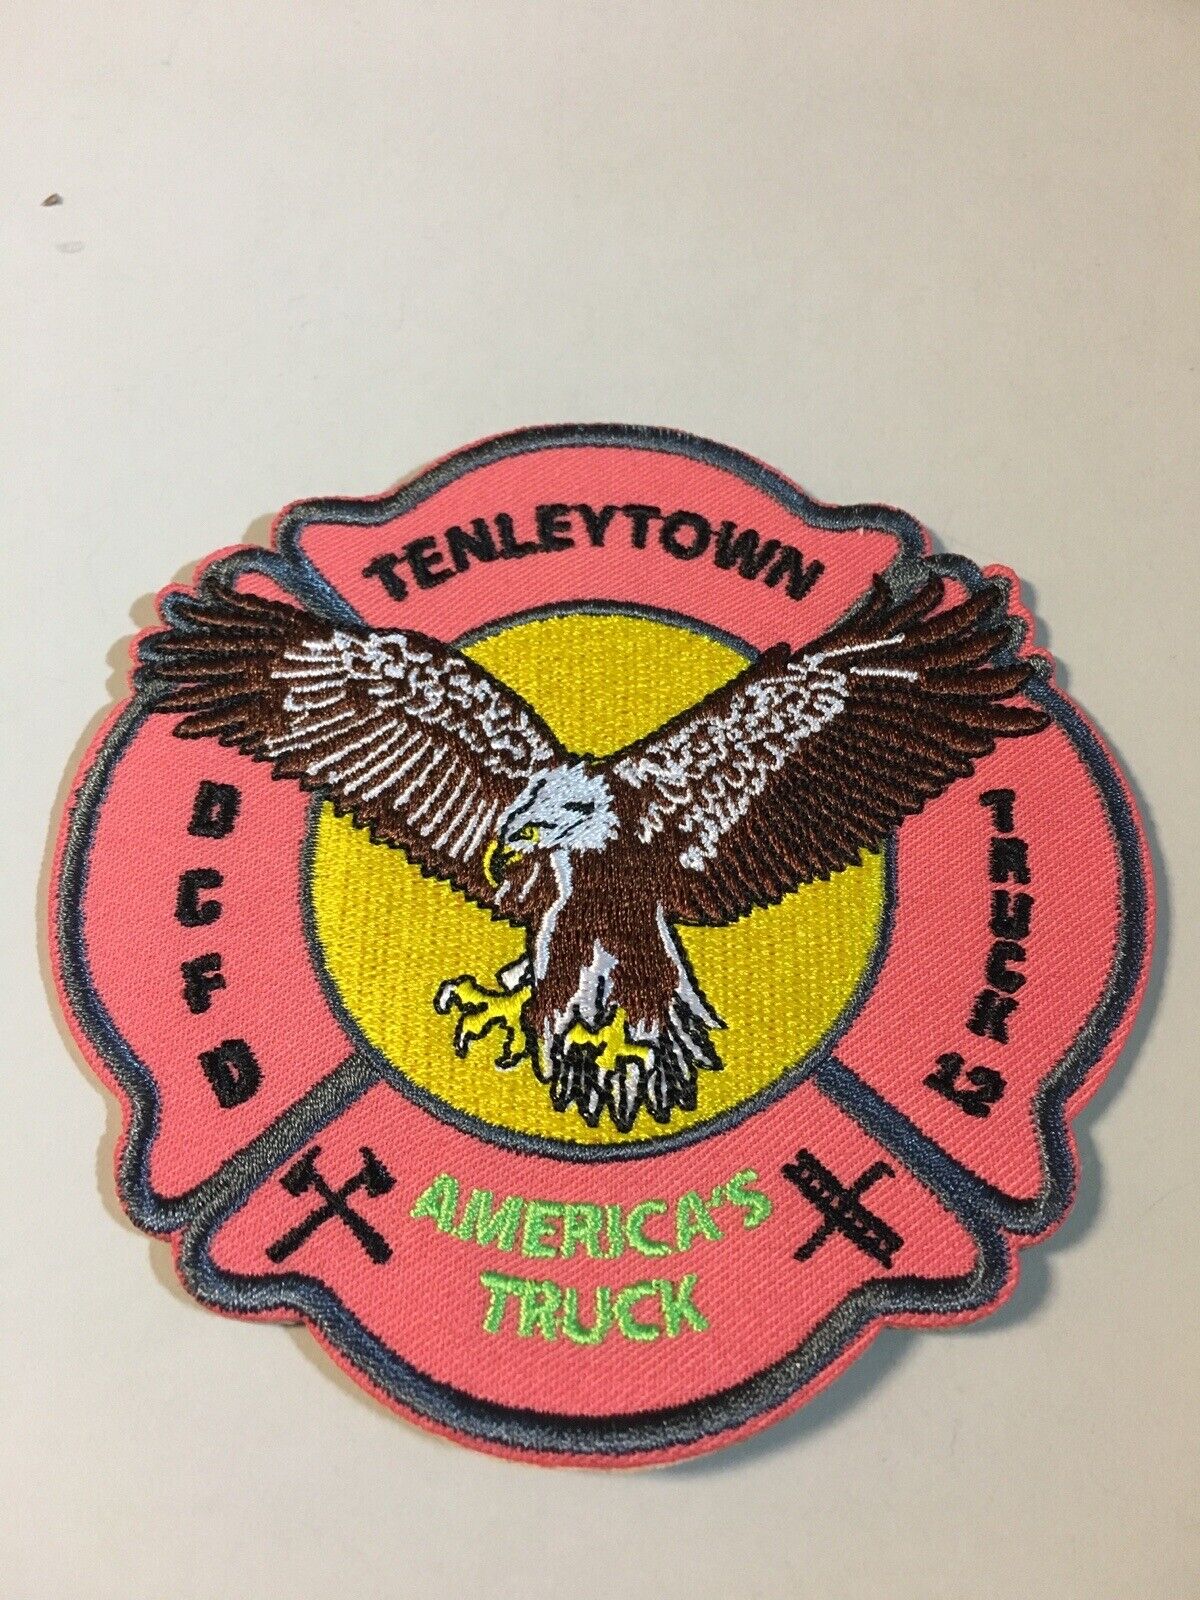 DCFD Truck 12 Patch Limited Edition Breast Cancer Awareness Patch